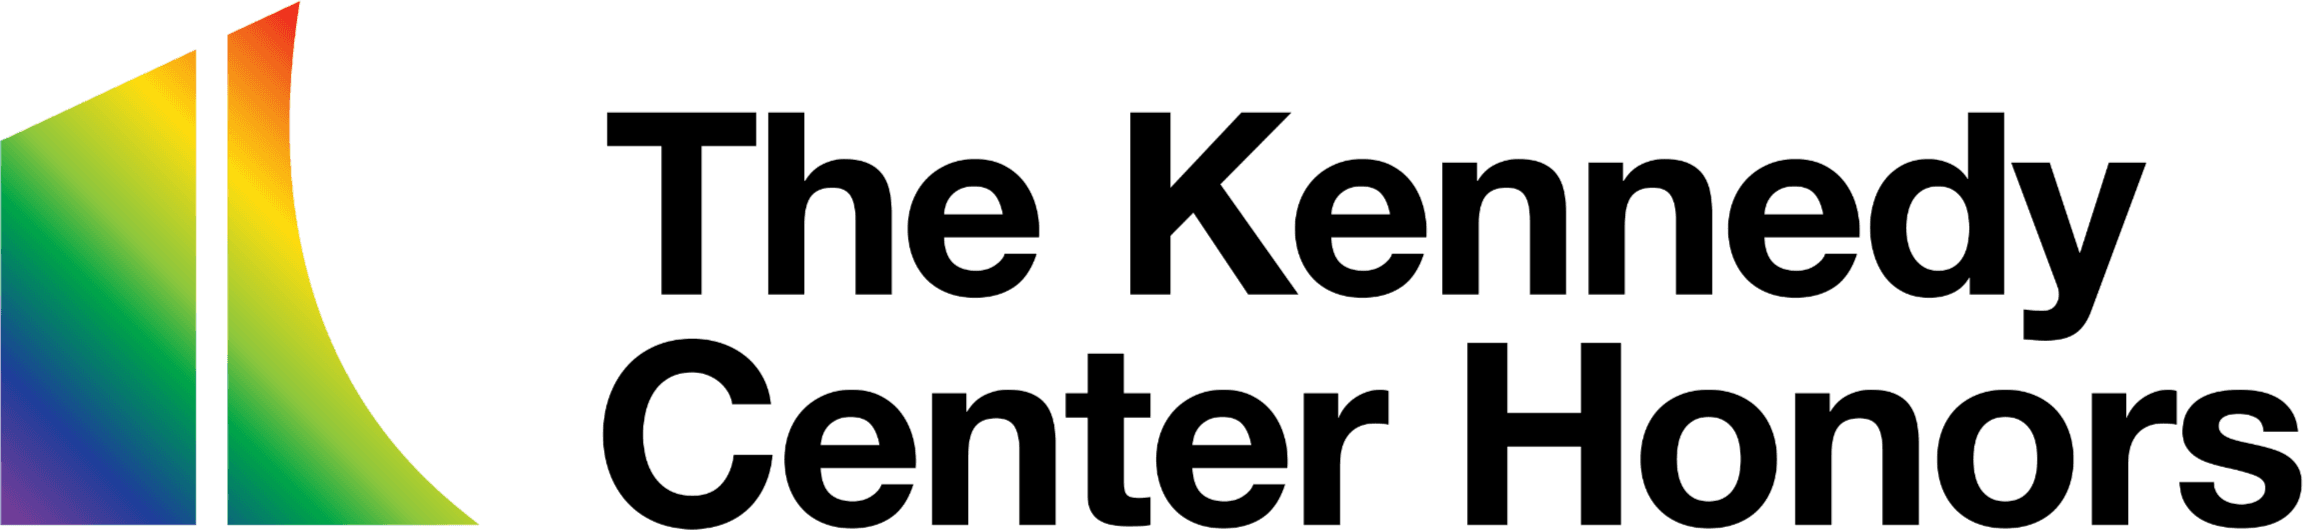 The Kennedy Center Honors logo